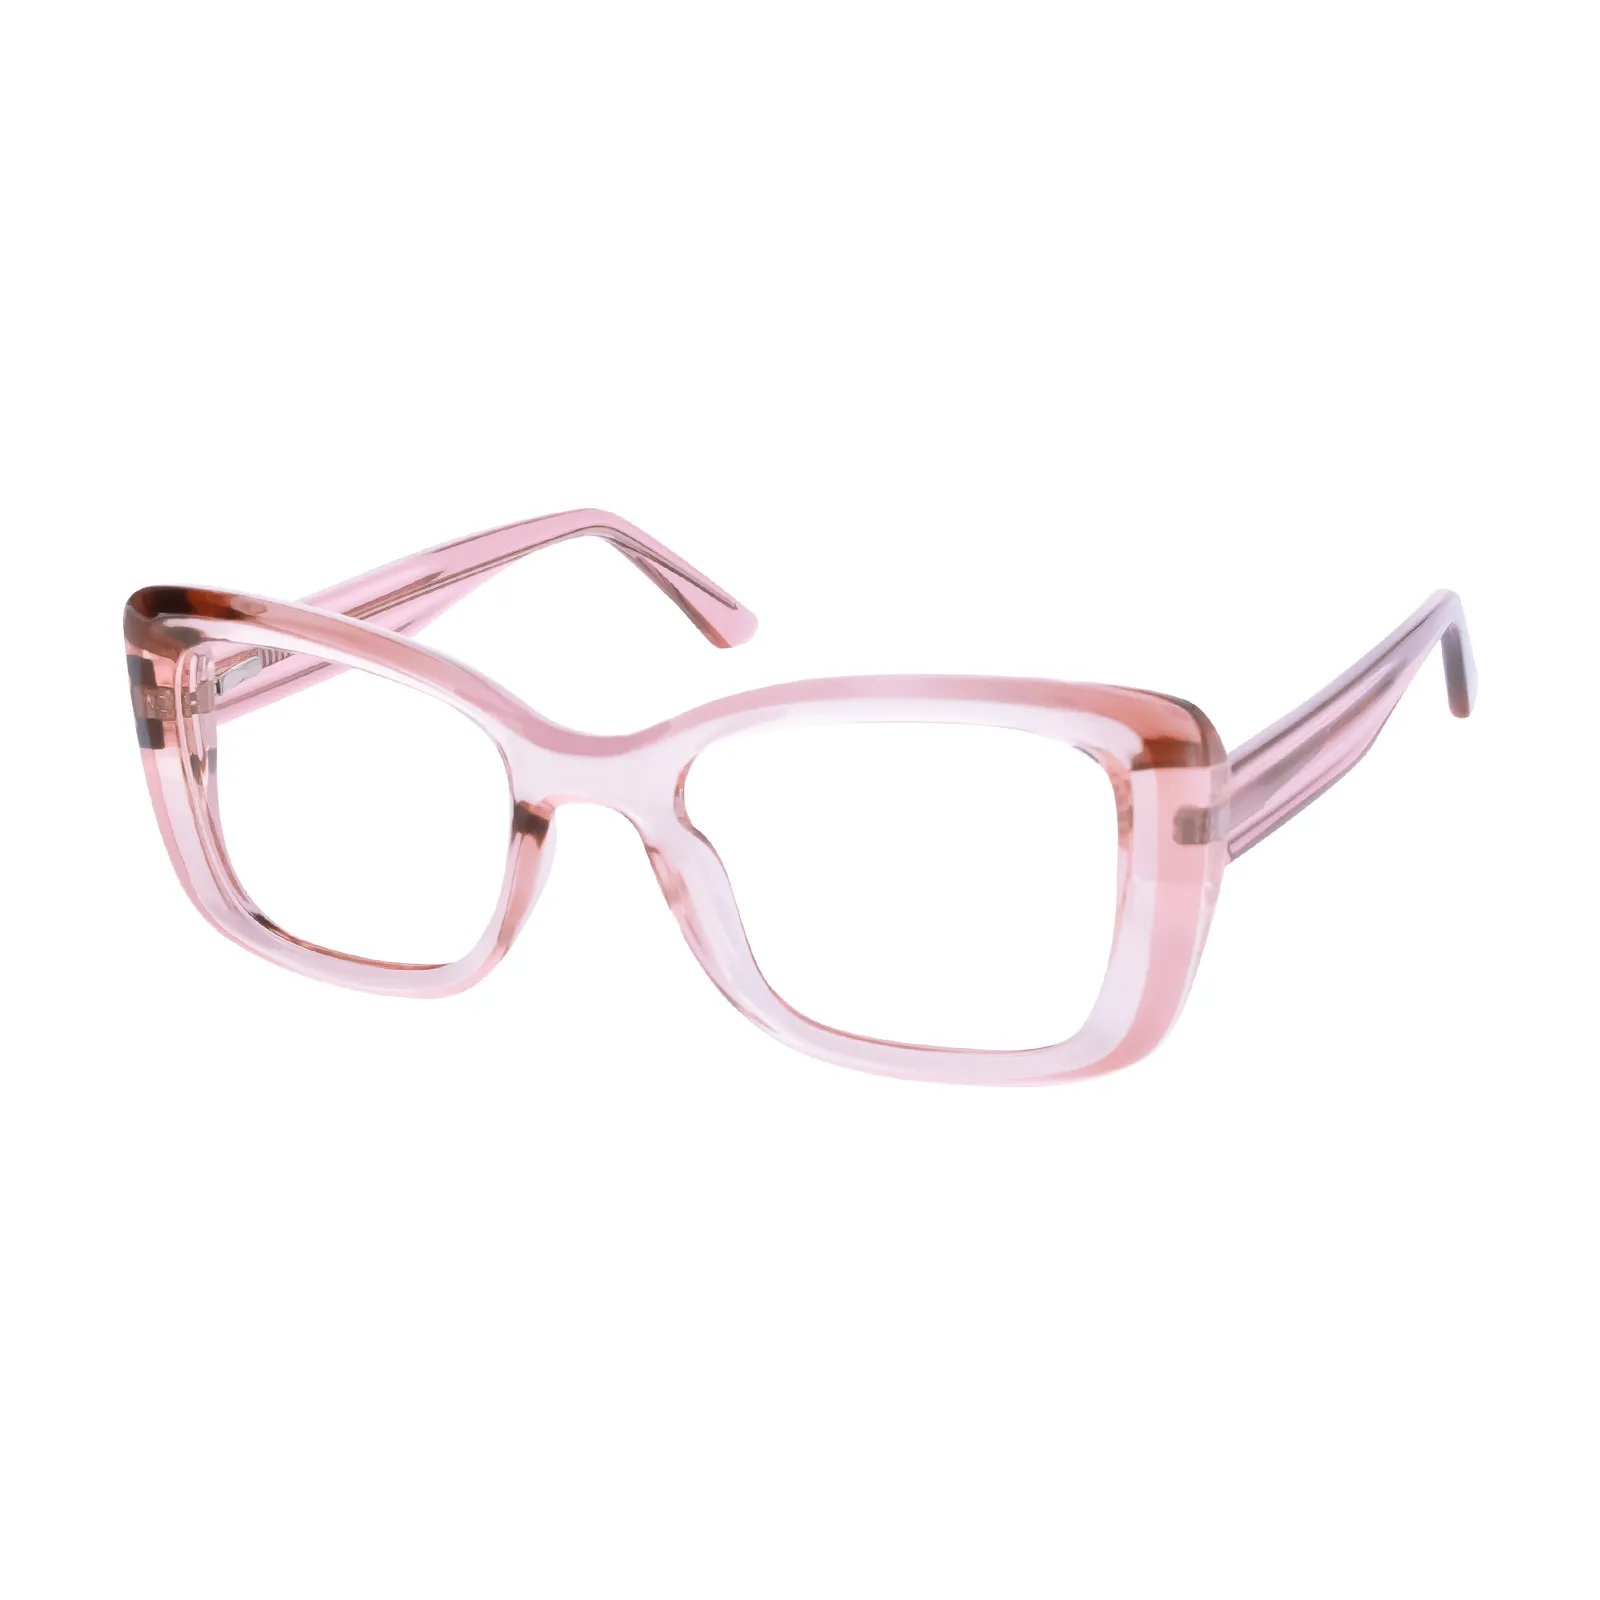 Maggie - Square Pink Glasses for Women